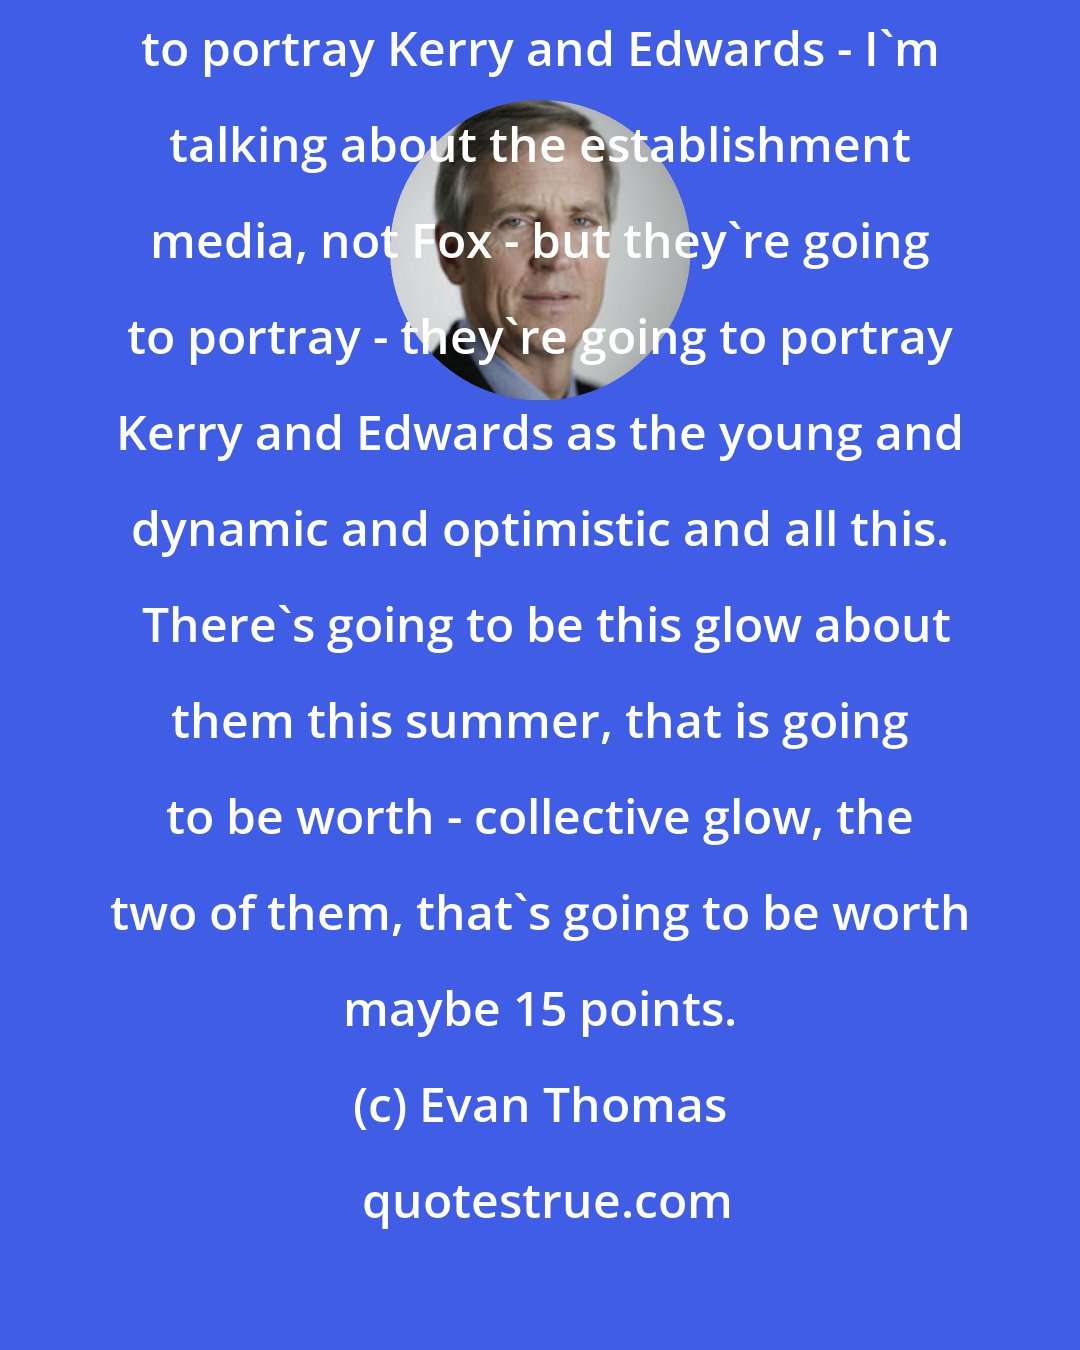 Evan Thomas: The media, I think, wants Kerry to win.  And I think they're going to portray Kerry and Edwards - I'm talking about the establishment media, not Fox - but they're going to portray - they're going to portray Kerry and Edwards as the young and dynamic and optimistic and all this.  There's going to be this glow about them this summer, that is going to be worth - collective glow, the two of them, that's going to be worth maybe 15 points.